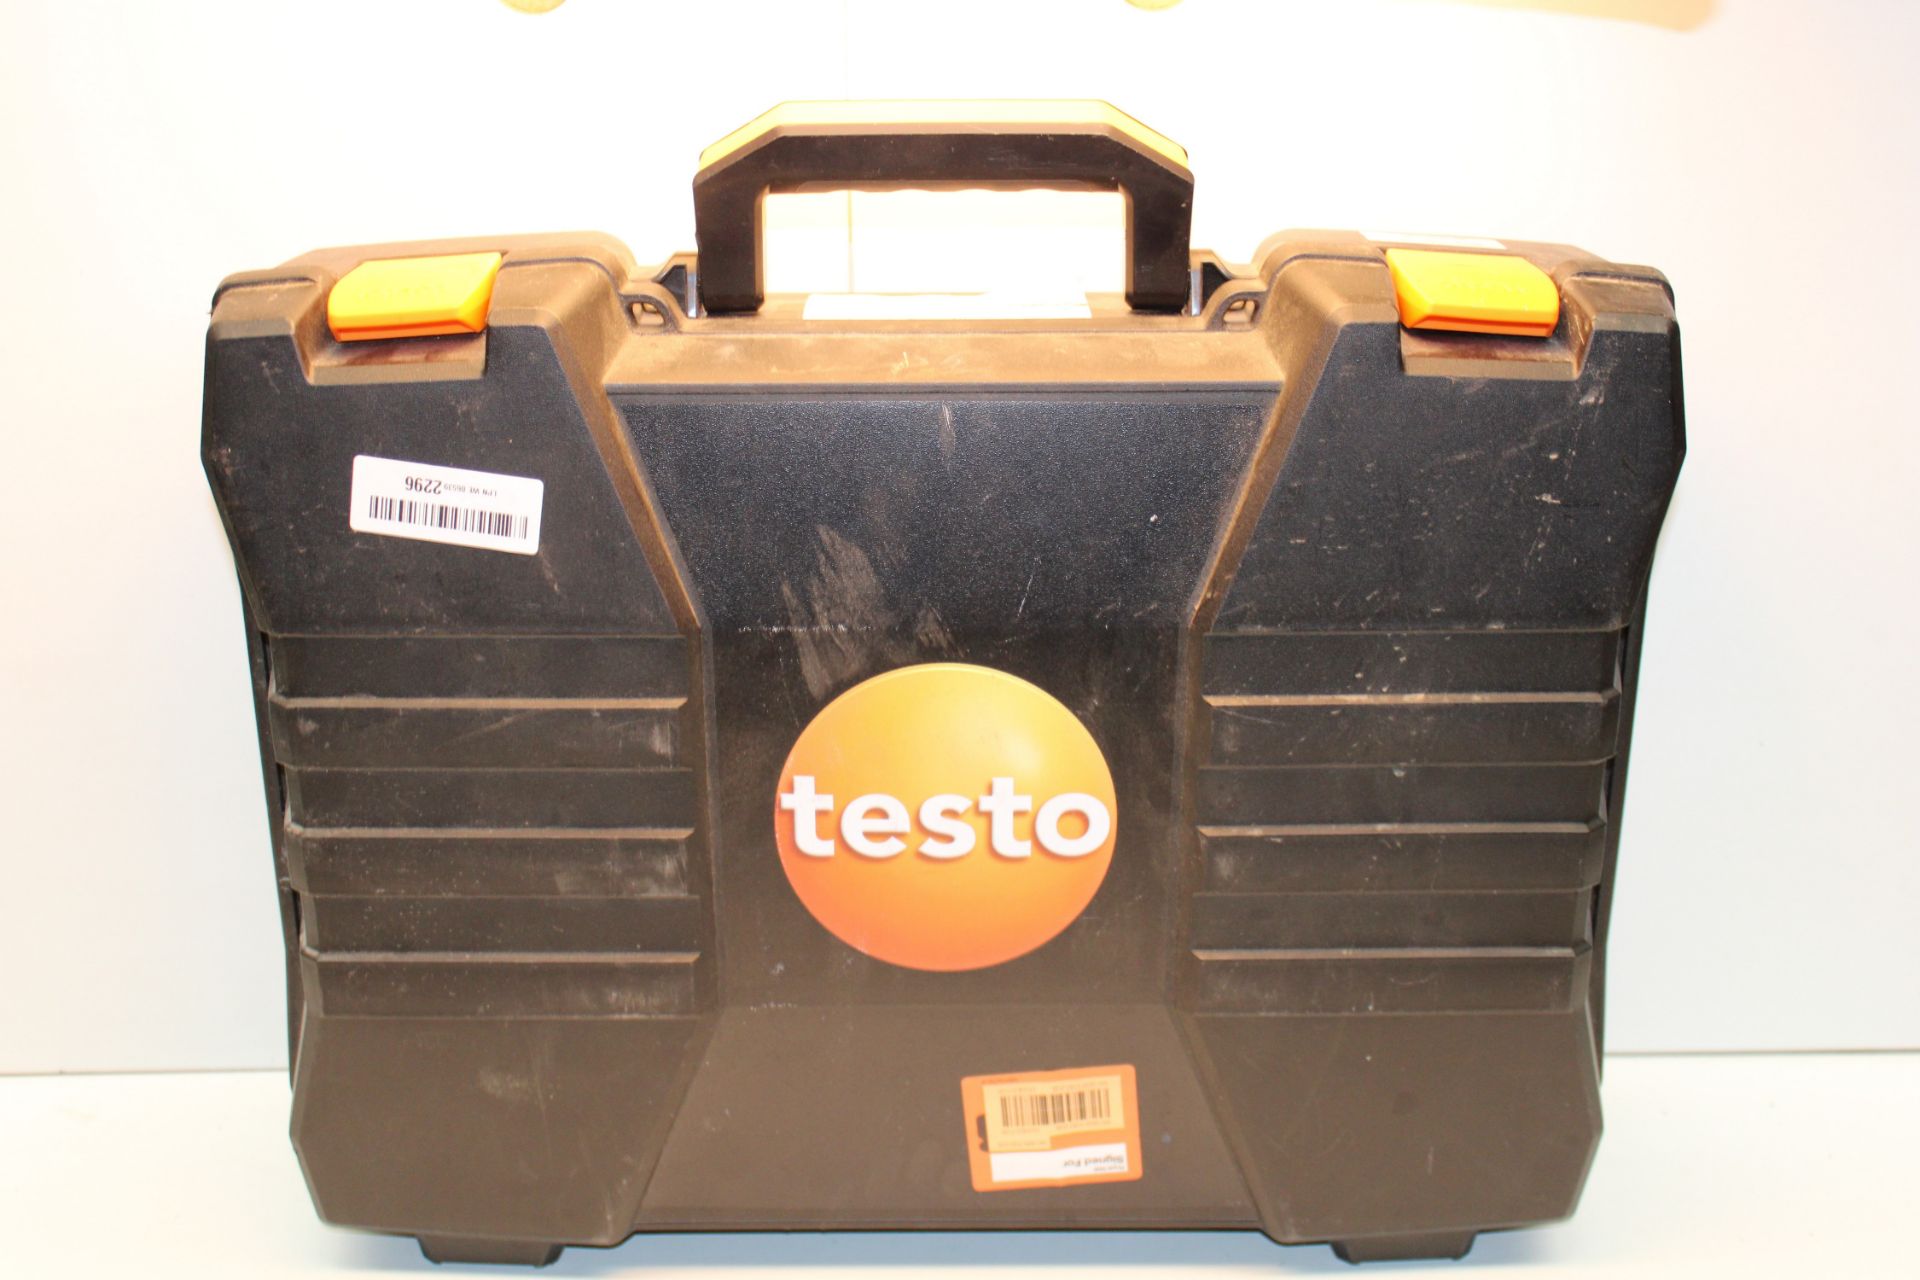 UNBOXED TESTO FLUE GAS ANALYSER TESTO 327 WITH FLIGHT CASE RRP £574.80Condition ReportAppraisal